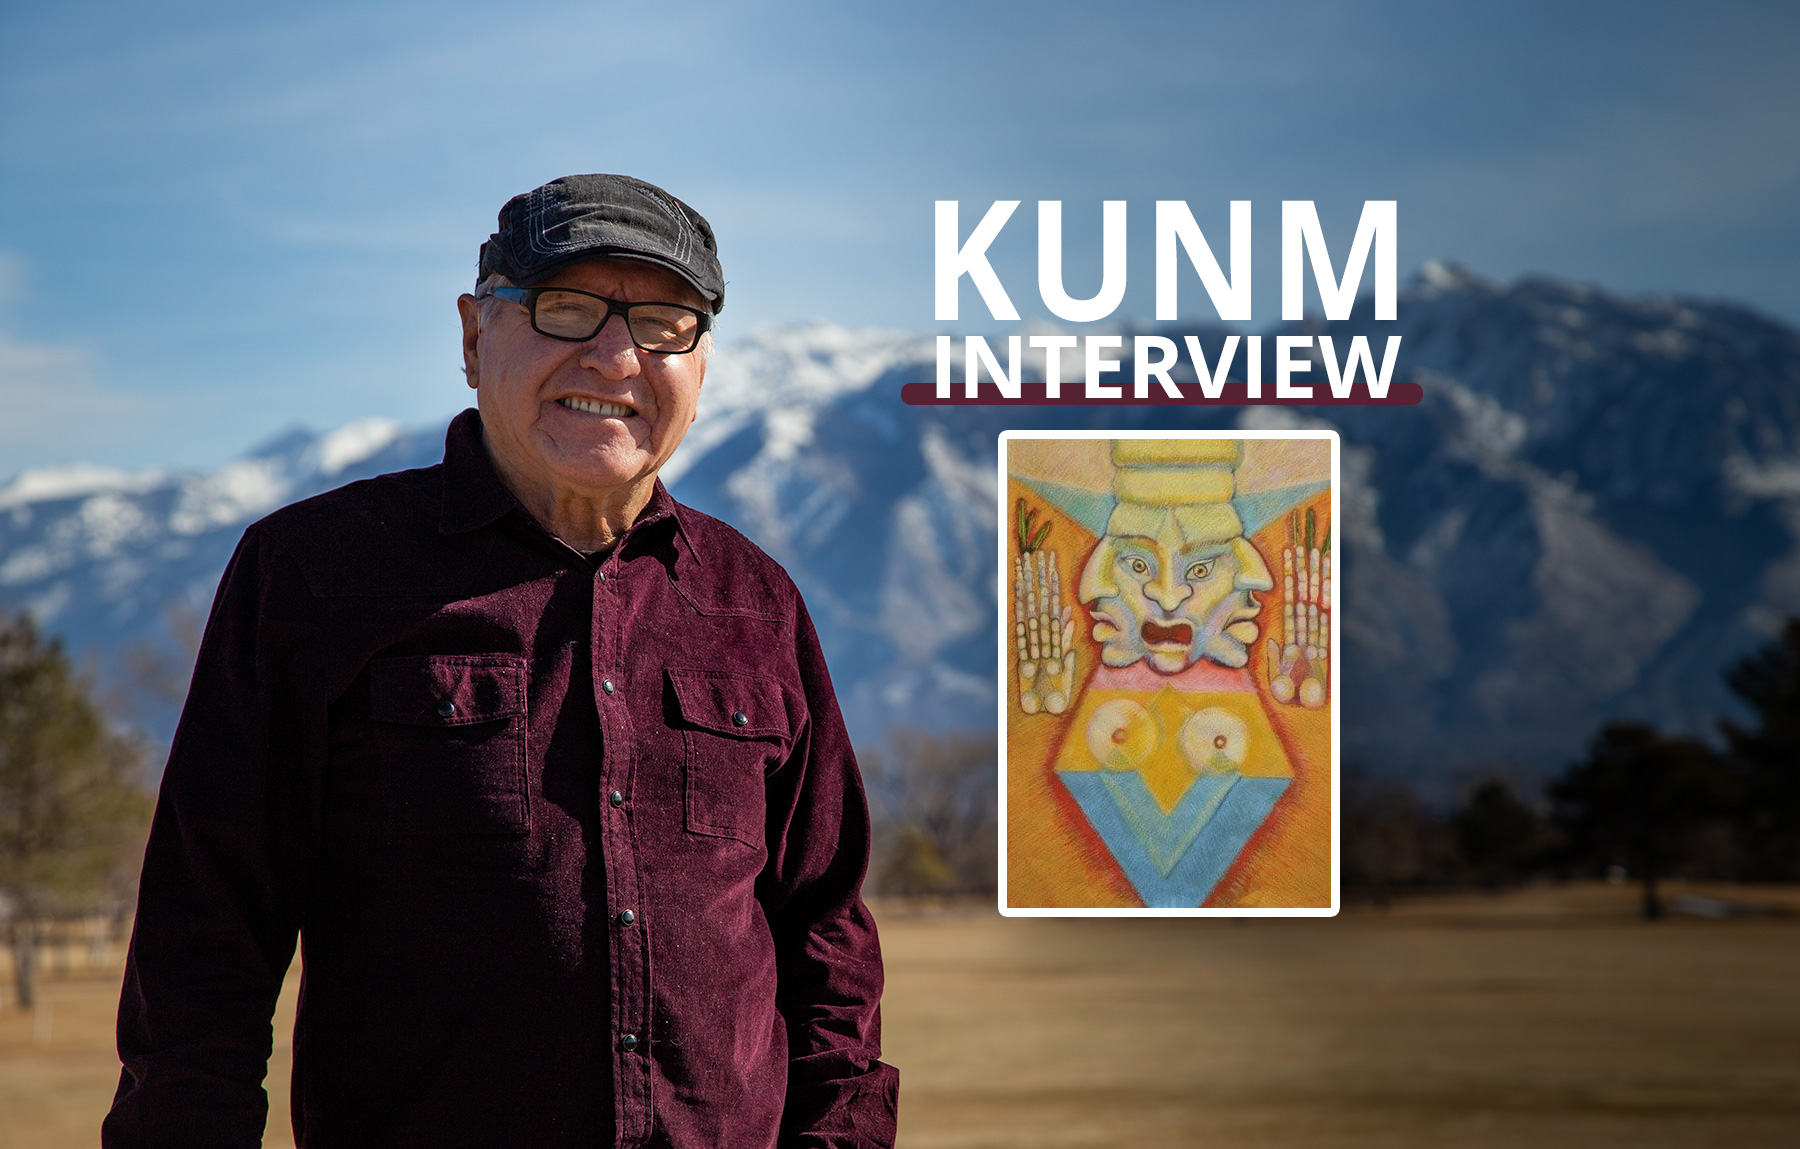 Featured image for “KUNM Interview”